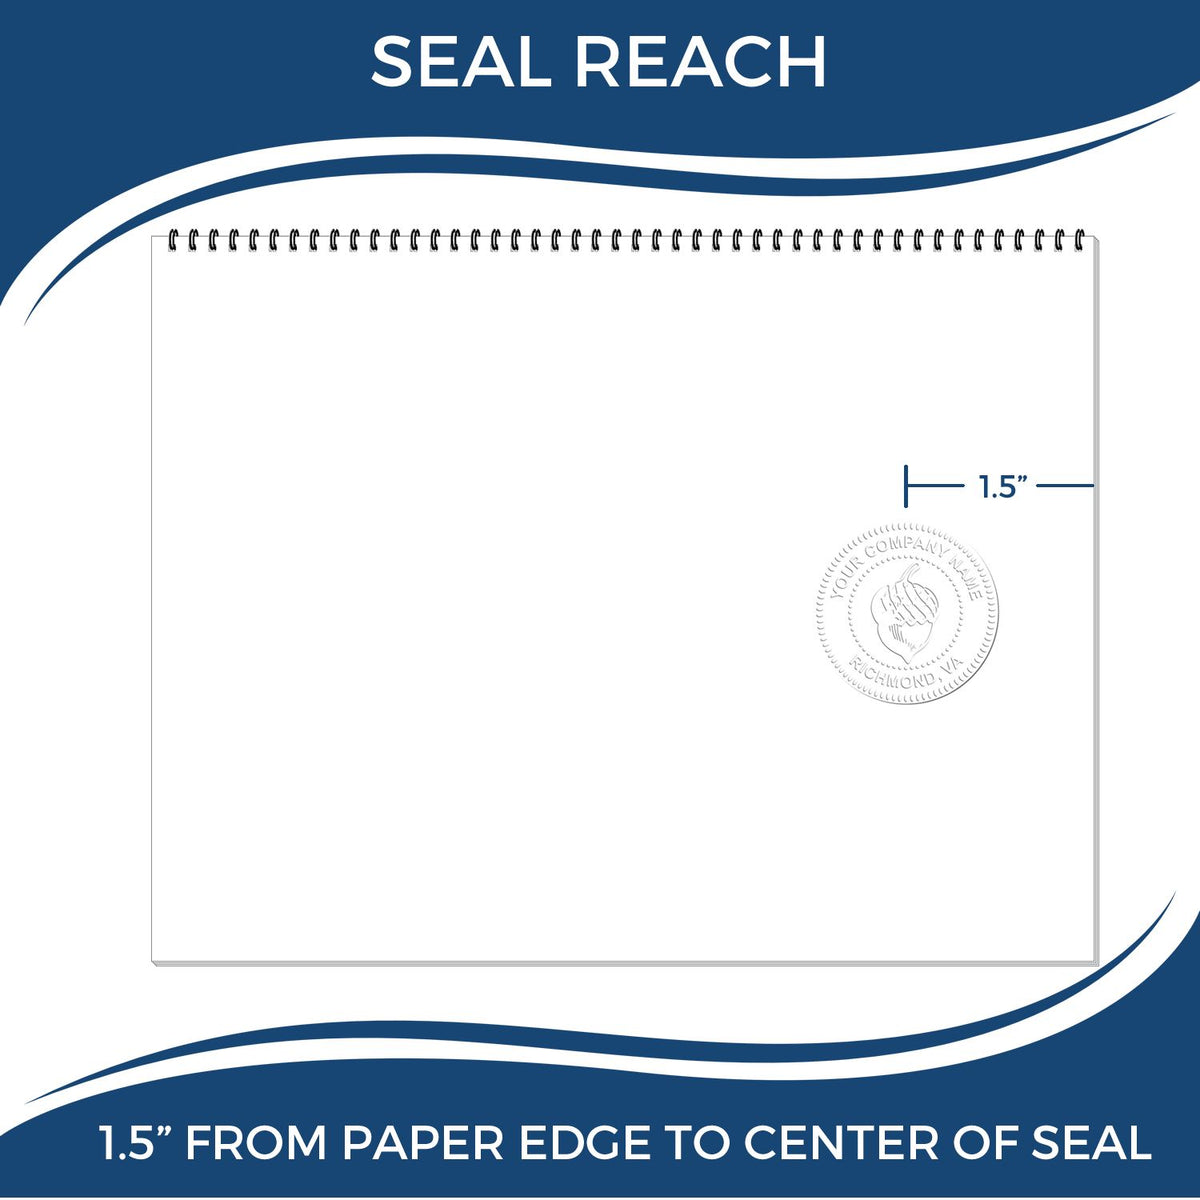 An infographic showing the seal reach which is represented by a ruler and a miniature seal image of the Soft Indiana Professional Engineer Seal